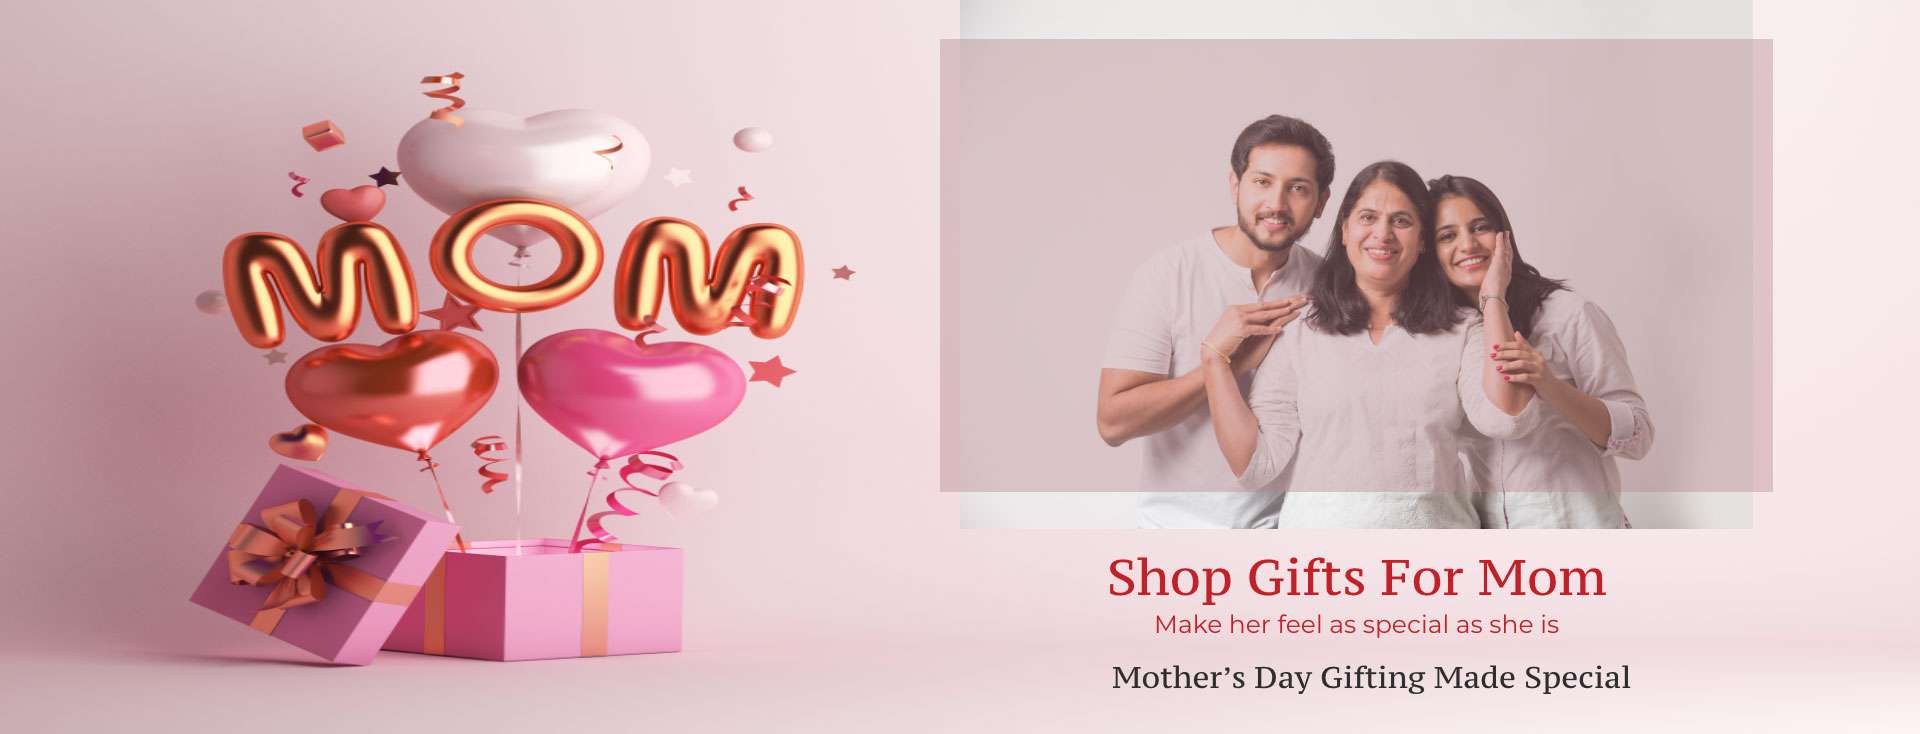 Cheers Your Mom On This Mother’s Day With Exclusive Gift Thoughts